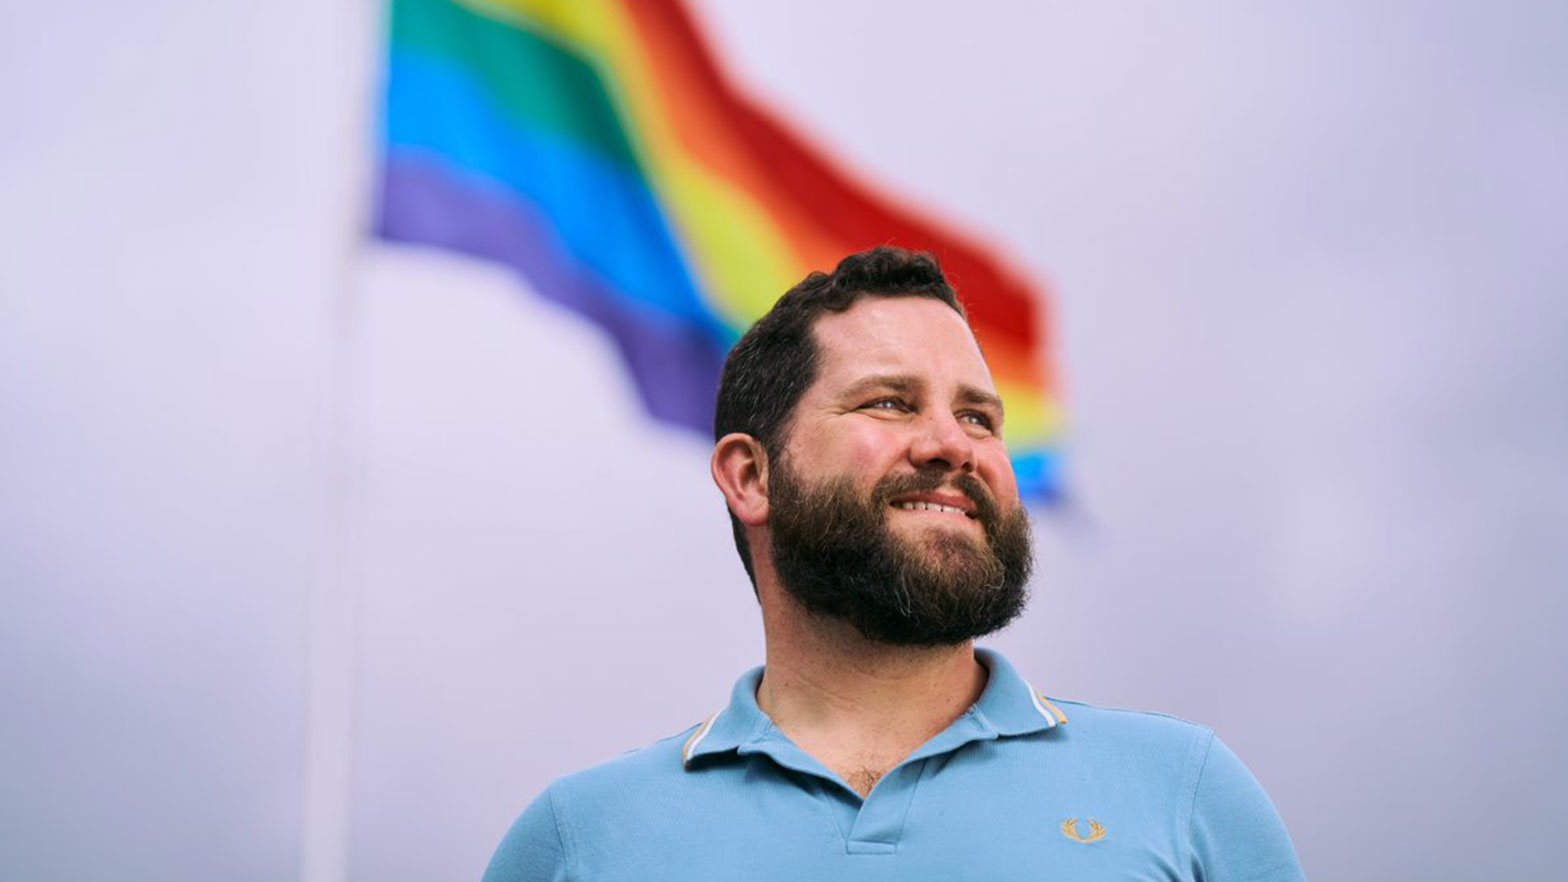 Brian Redmond, a university recruiting advisor with Chevron, helps support early career professionals who identify as members of the LGBTQ+ community.